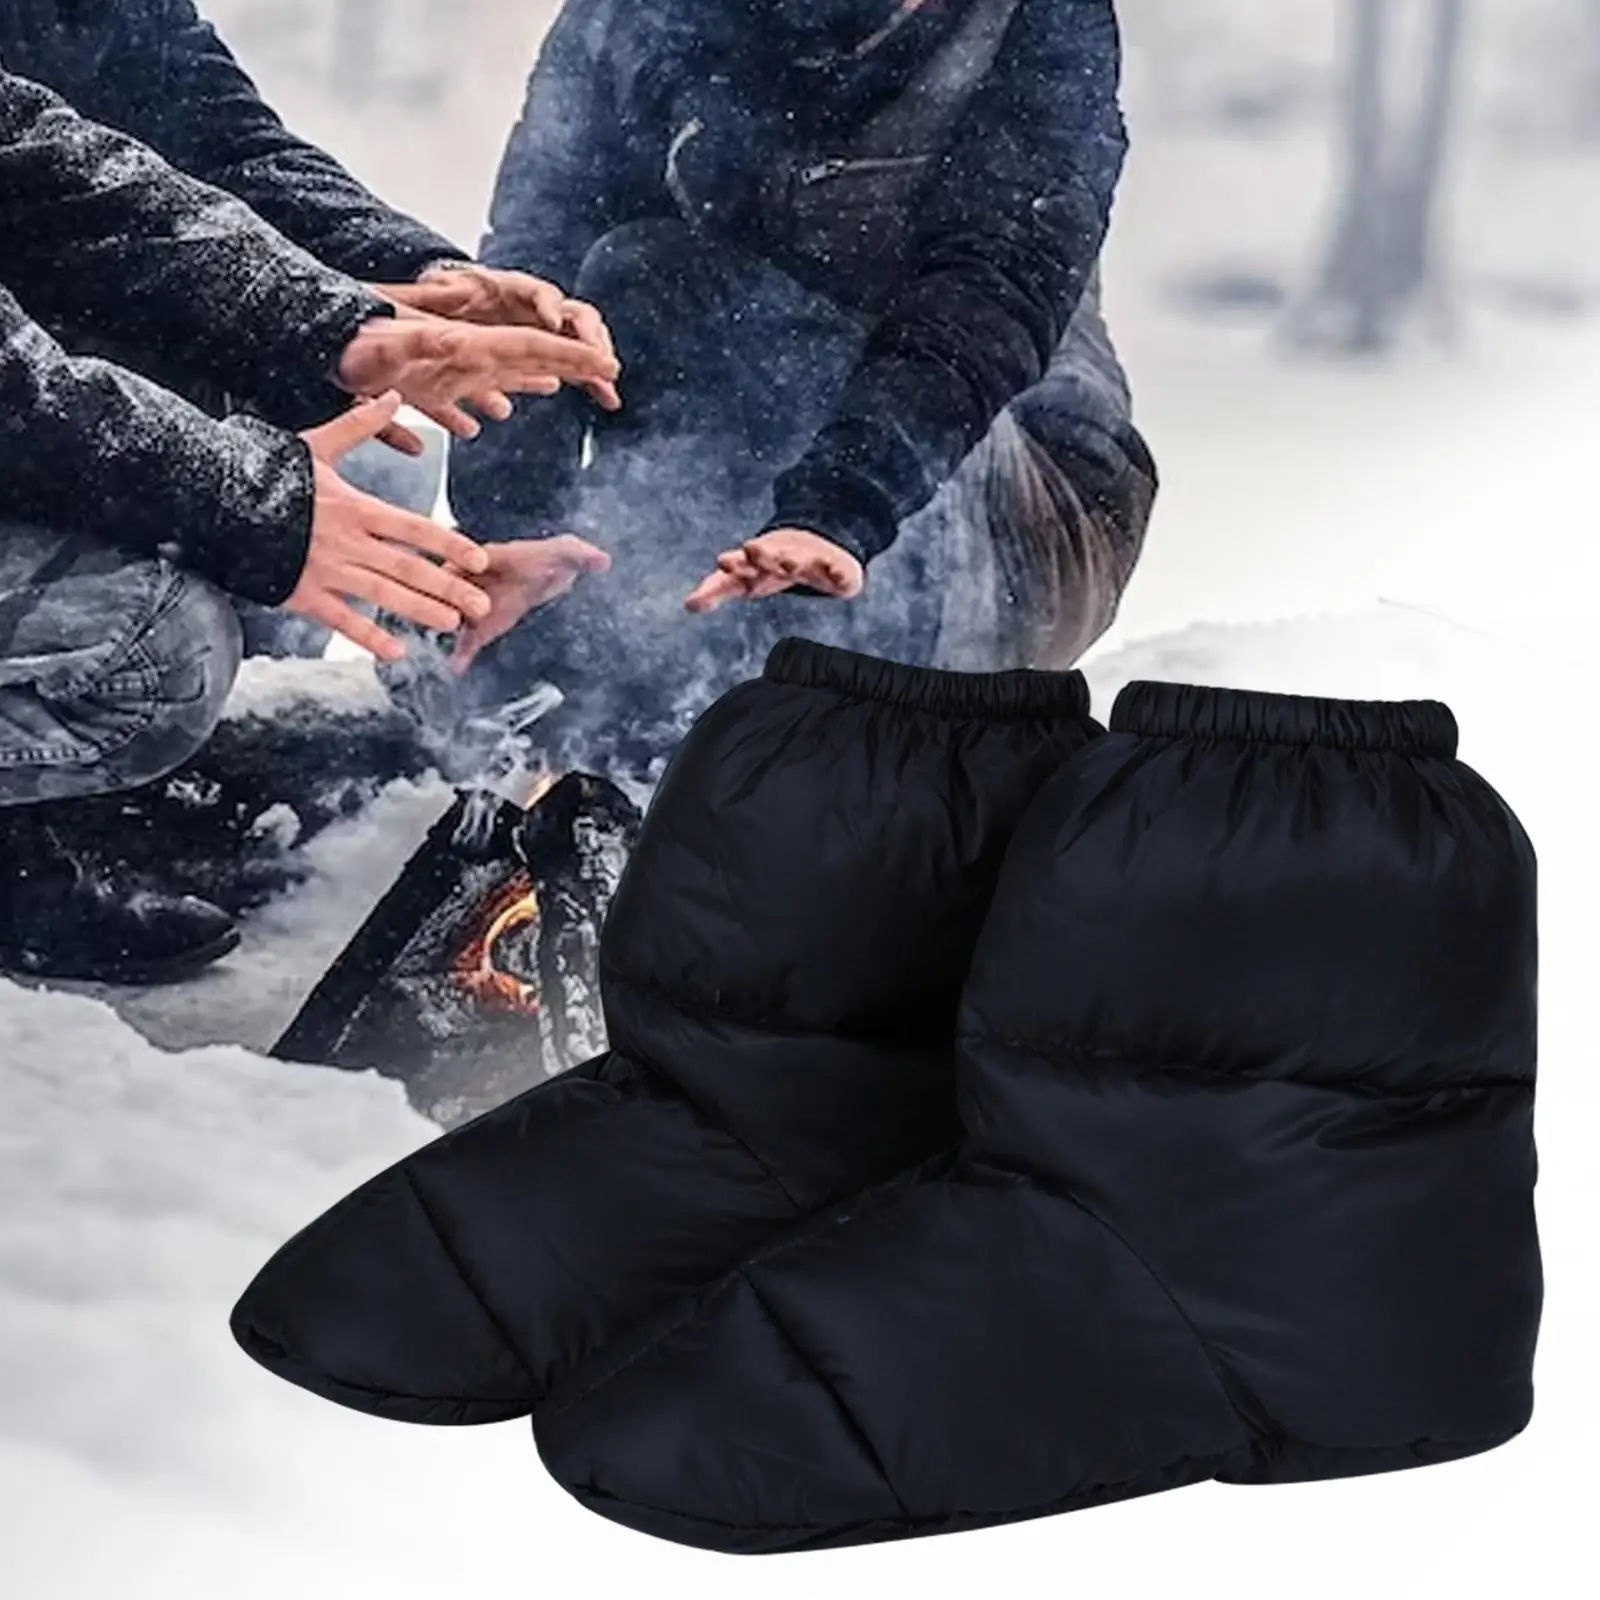 Winter Down Slippers Bootie Shoes Lightweight Keep Warm Windproof Ankle Snow Boots for Backpacking Bedroom Outdoor Skiing Indoor